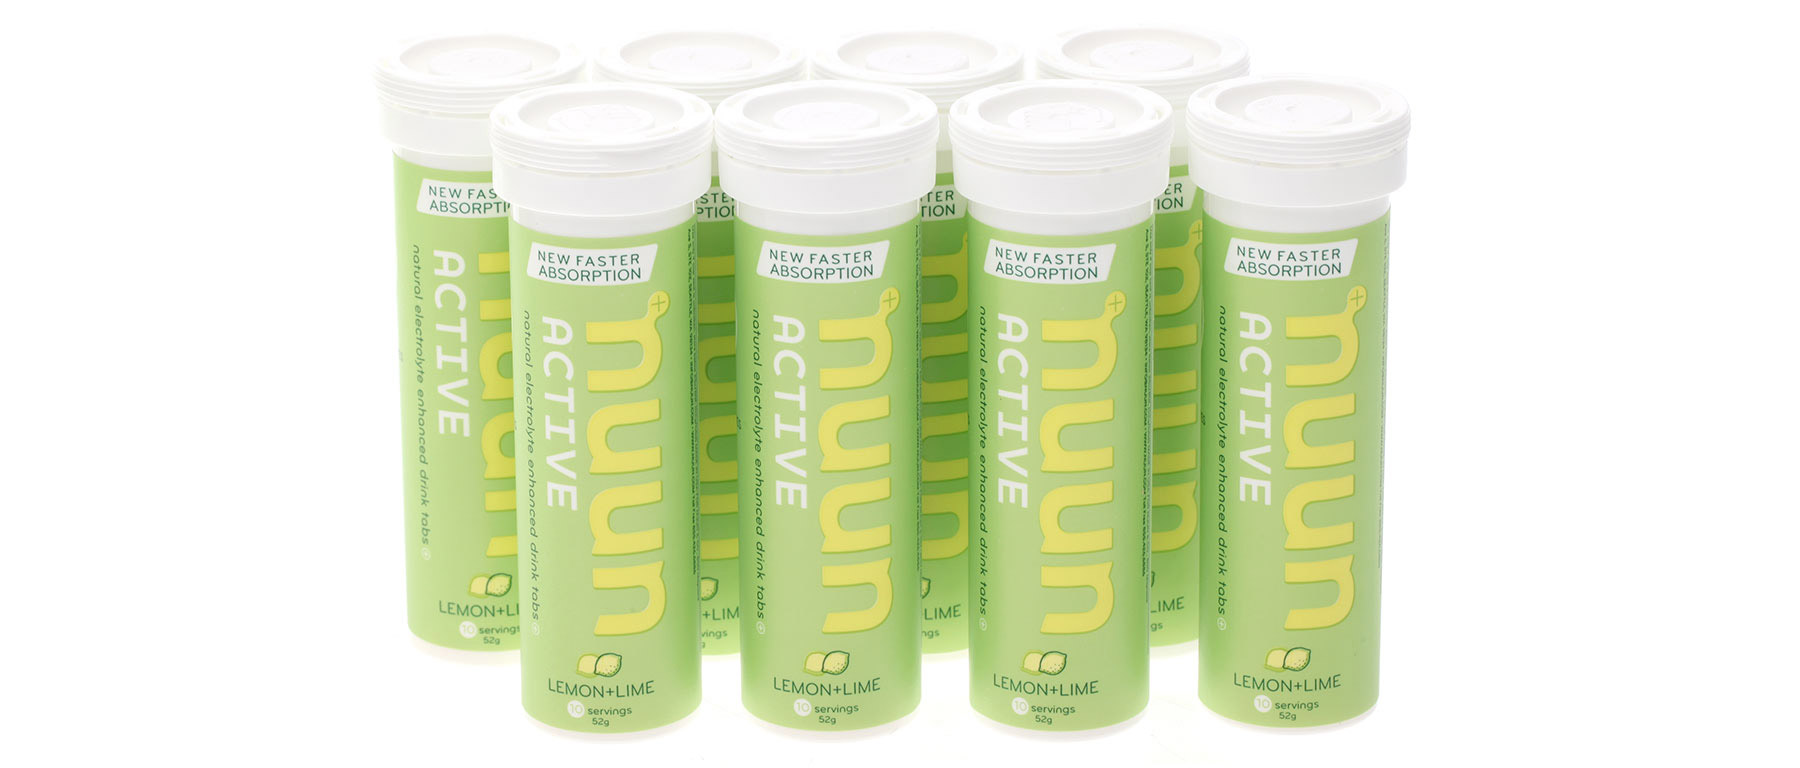 Nuun Active Tablets-Tube-8 pack